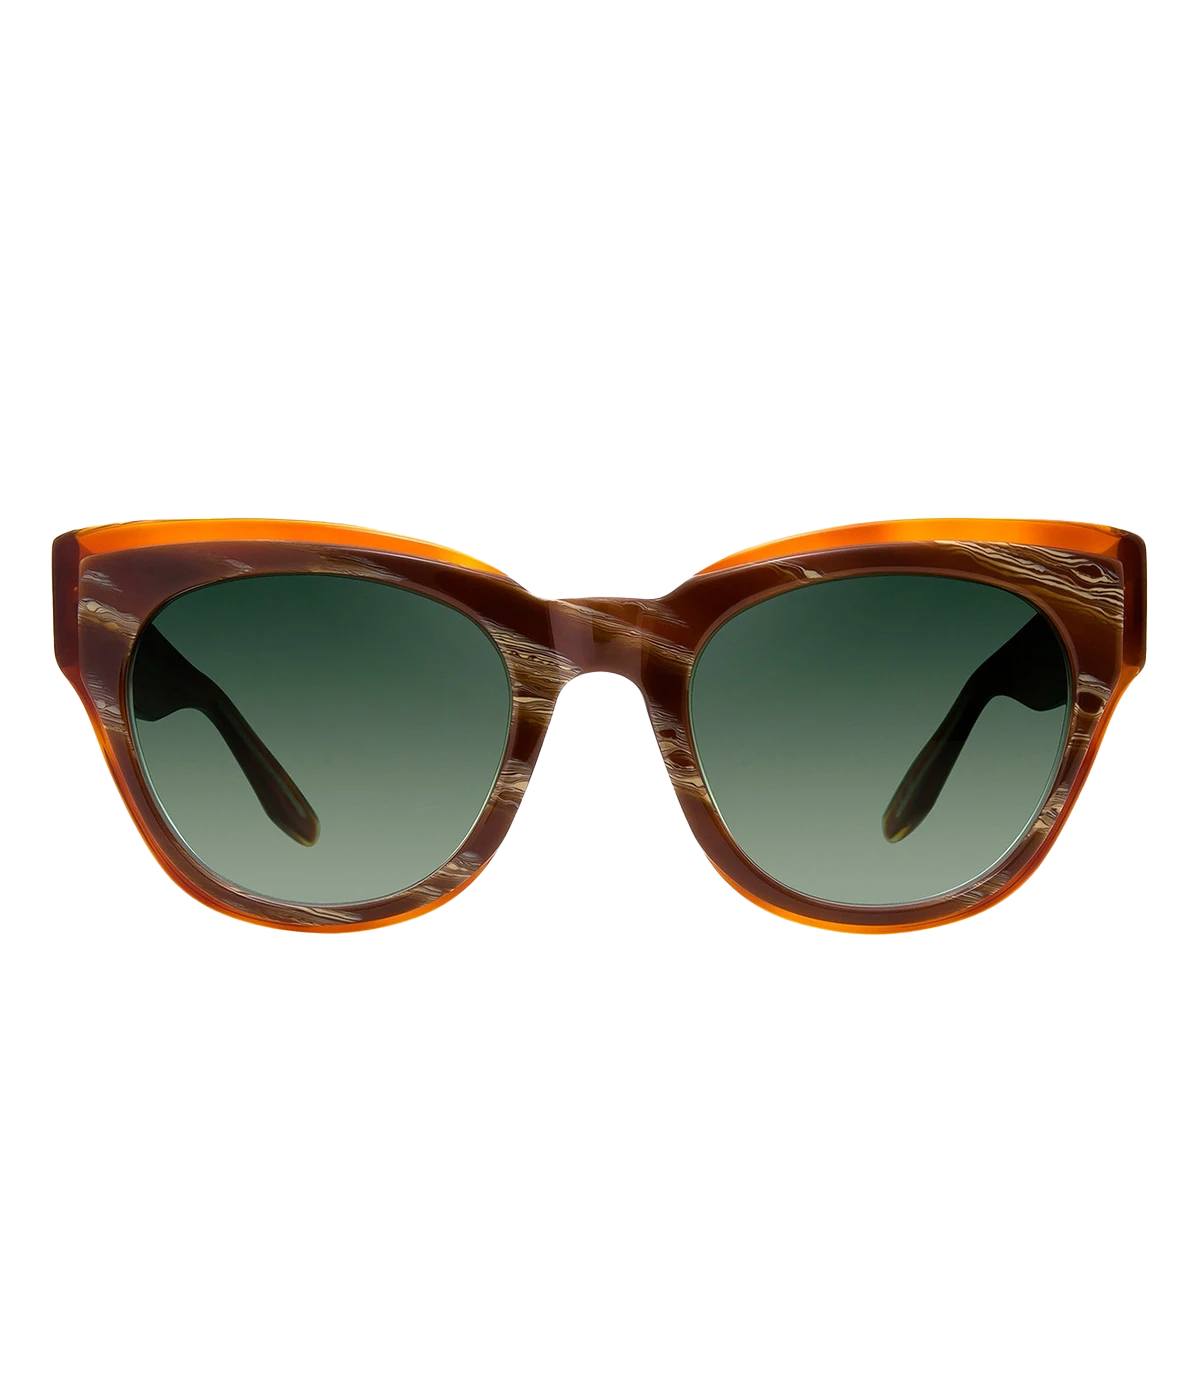 Lioness Sunglasses in Brown & Green